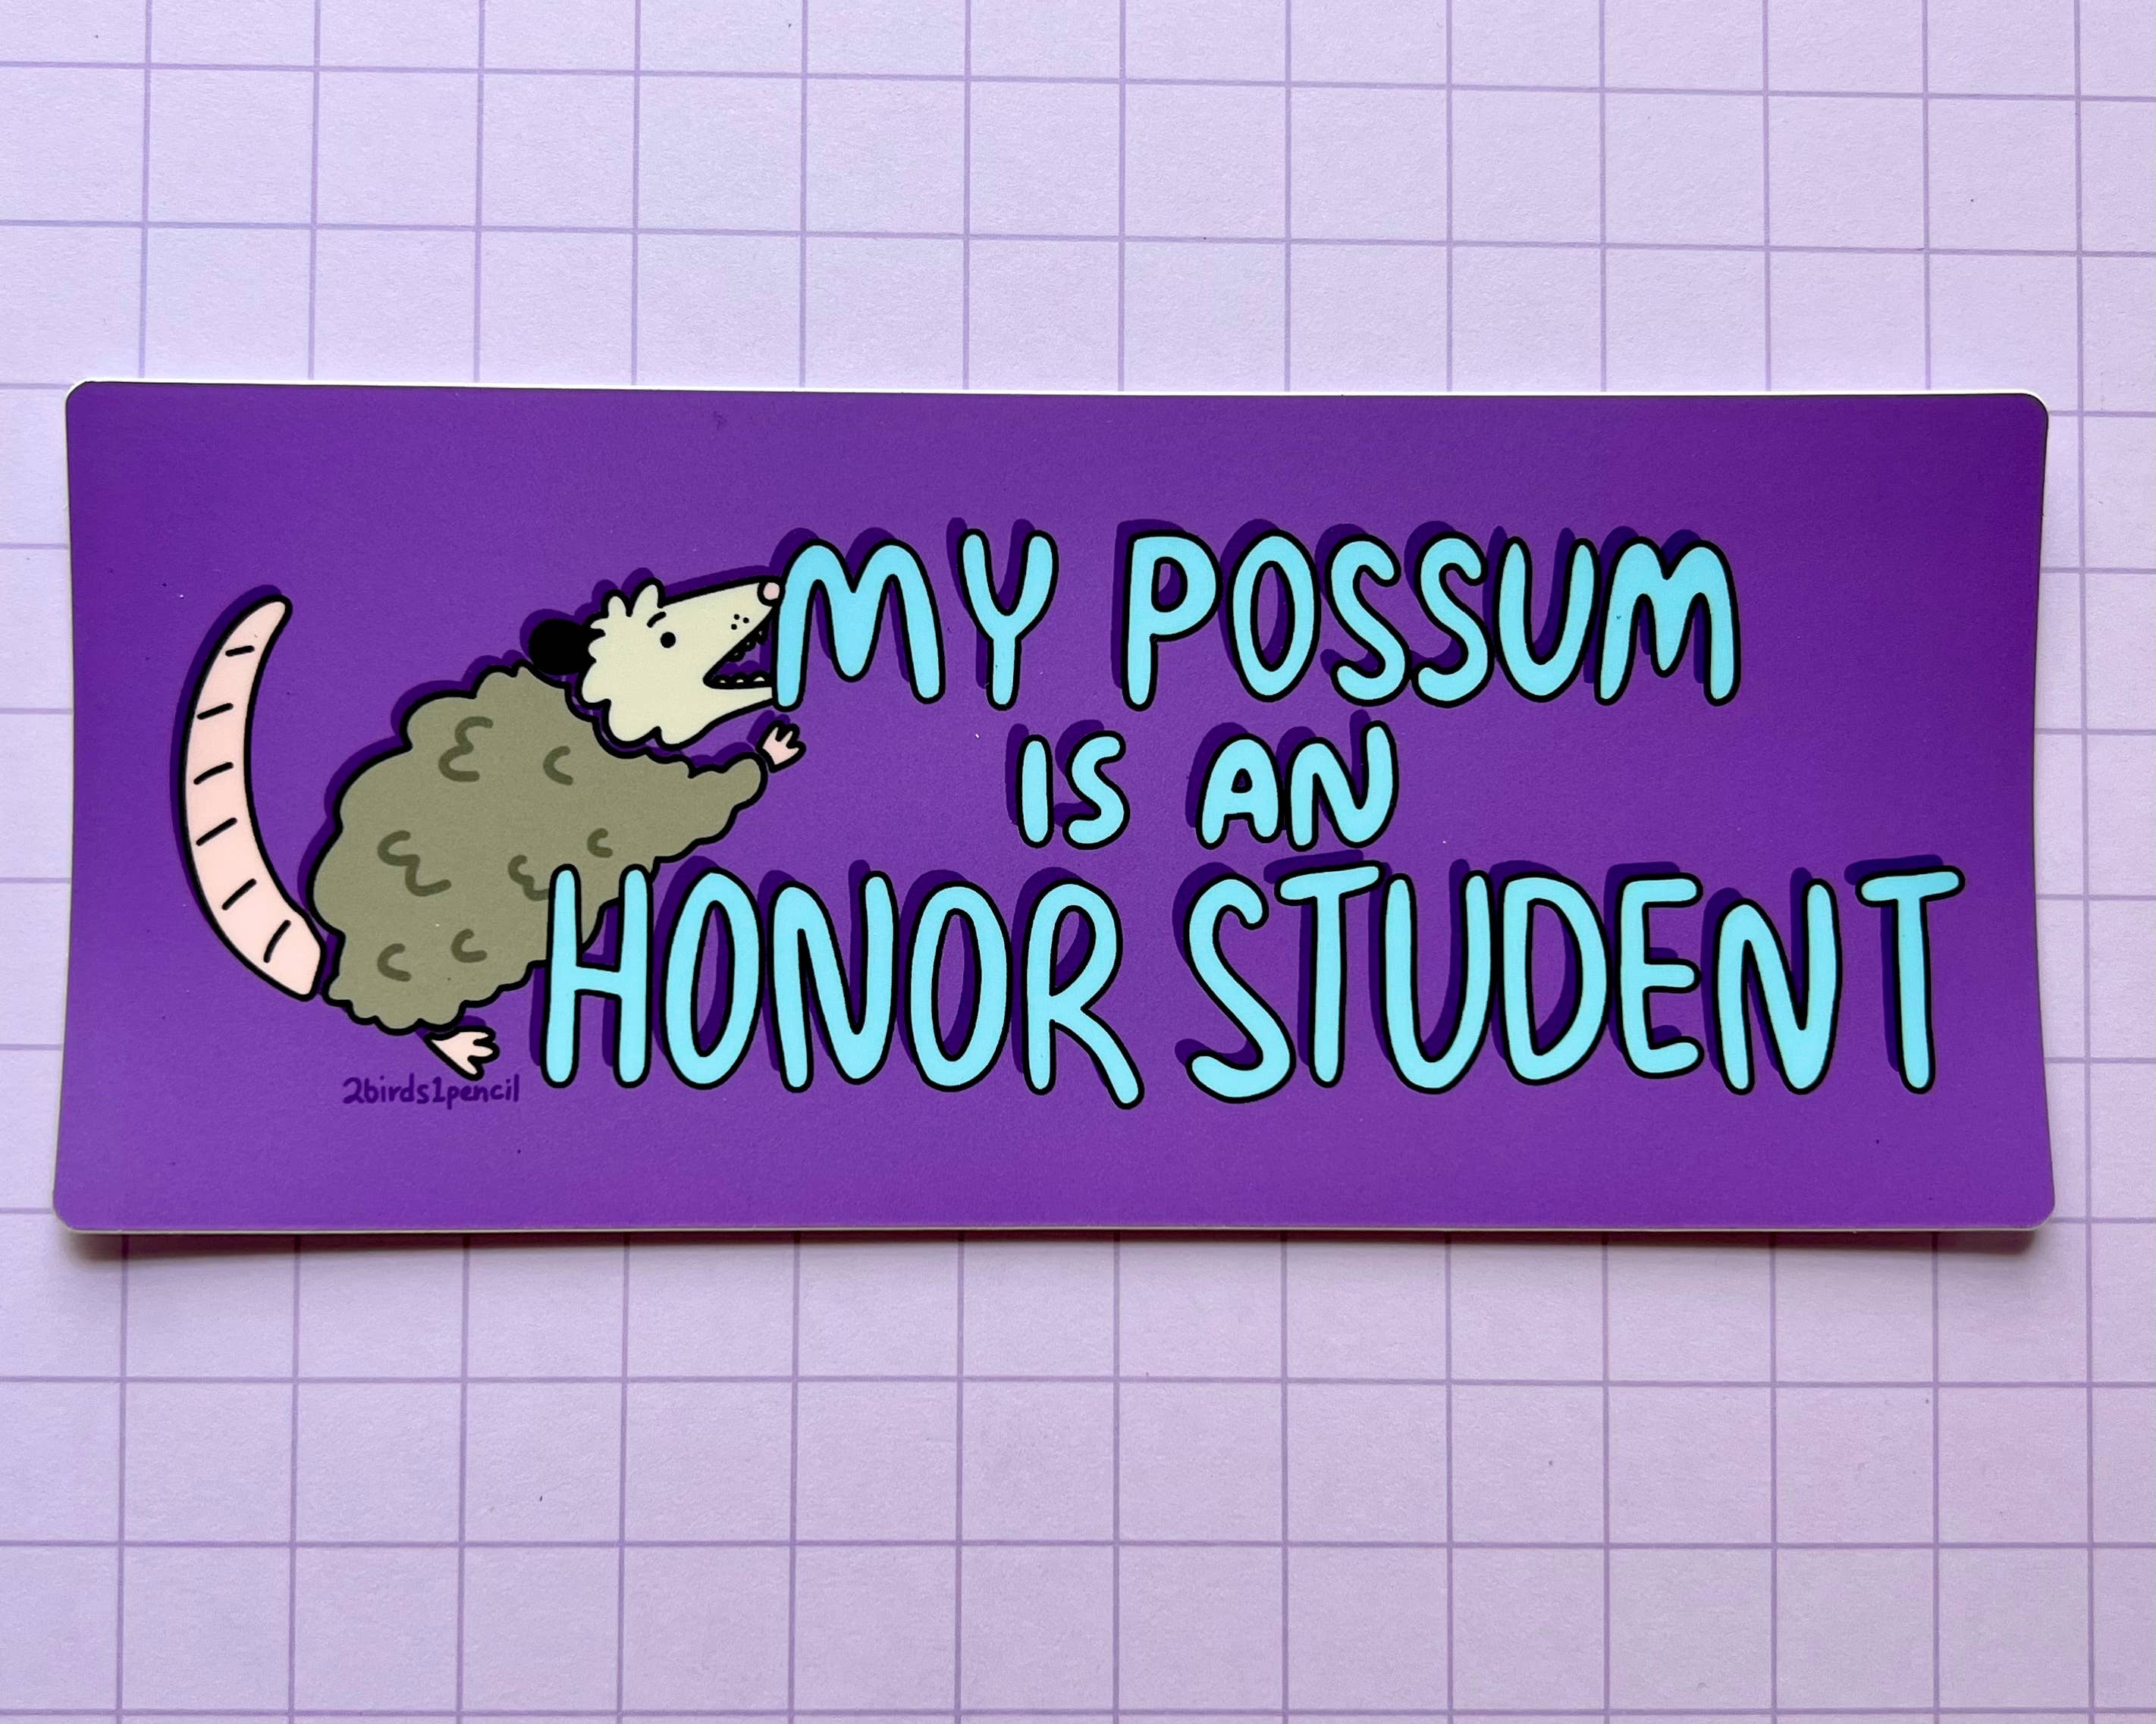 "My Possum is an Honor Student" Bumper Sticker: Large (7 x 3")